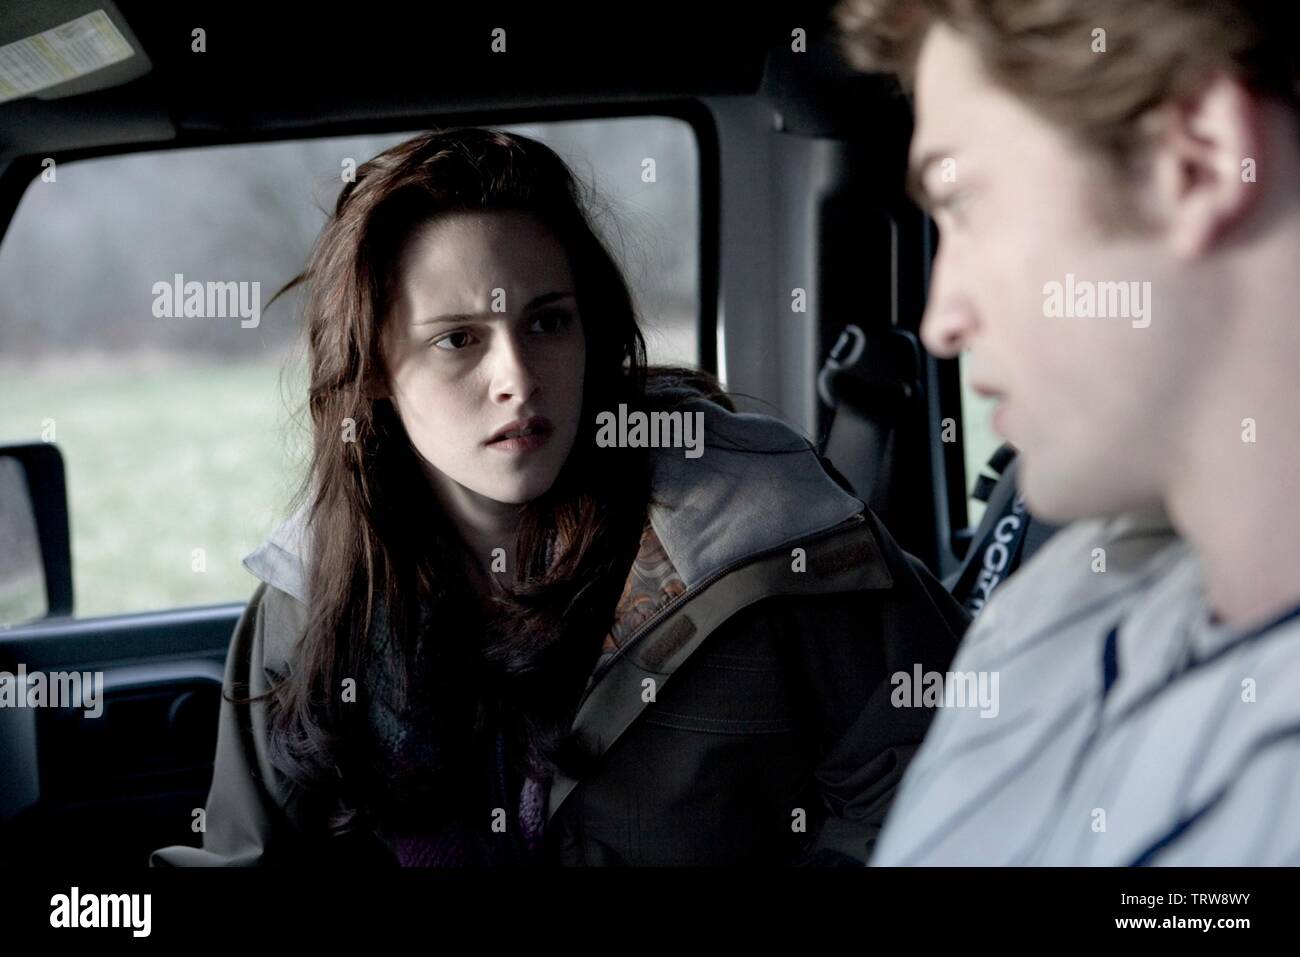 ROBERT PATTINSON and KRISTEN STEWART in TWILIGHT (2008). Copyright: Editorial use only. No merchandising or book covers. This is a publicly distributed handout. Access rights only, no license of copyright provided. Only to be reproduced in conjunction with promotion of this film. Credit: IMPRINT ENTERTAINMENT/MAVERICK FILMS/SUMMIT ENTERTAINMENT/ / Album Stock Photo